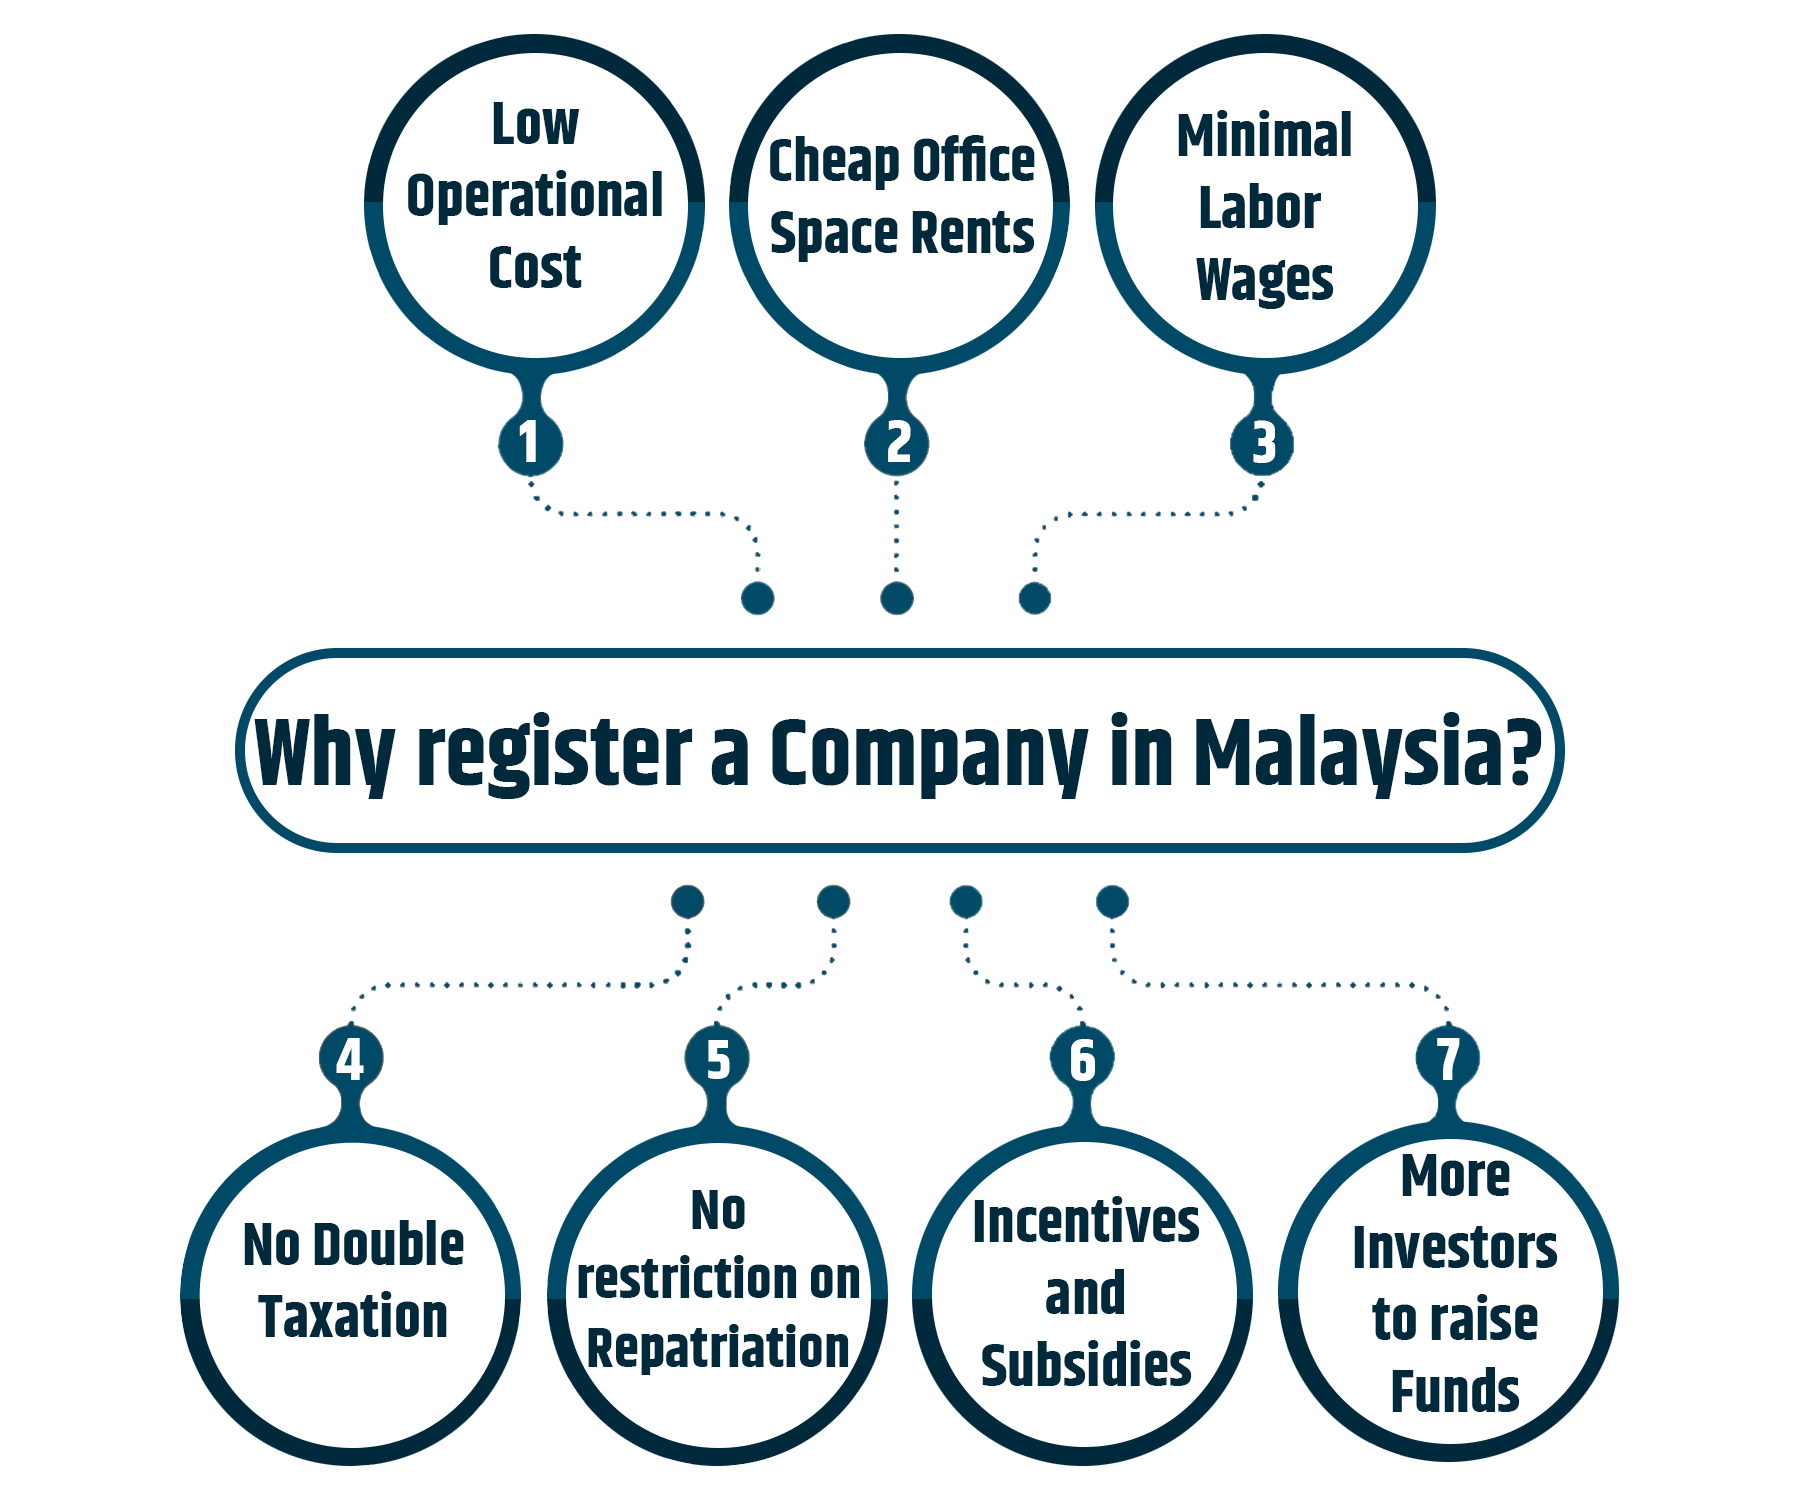 The benefits of company registration in malaysia